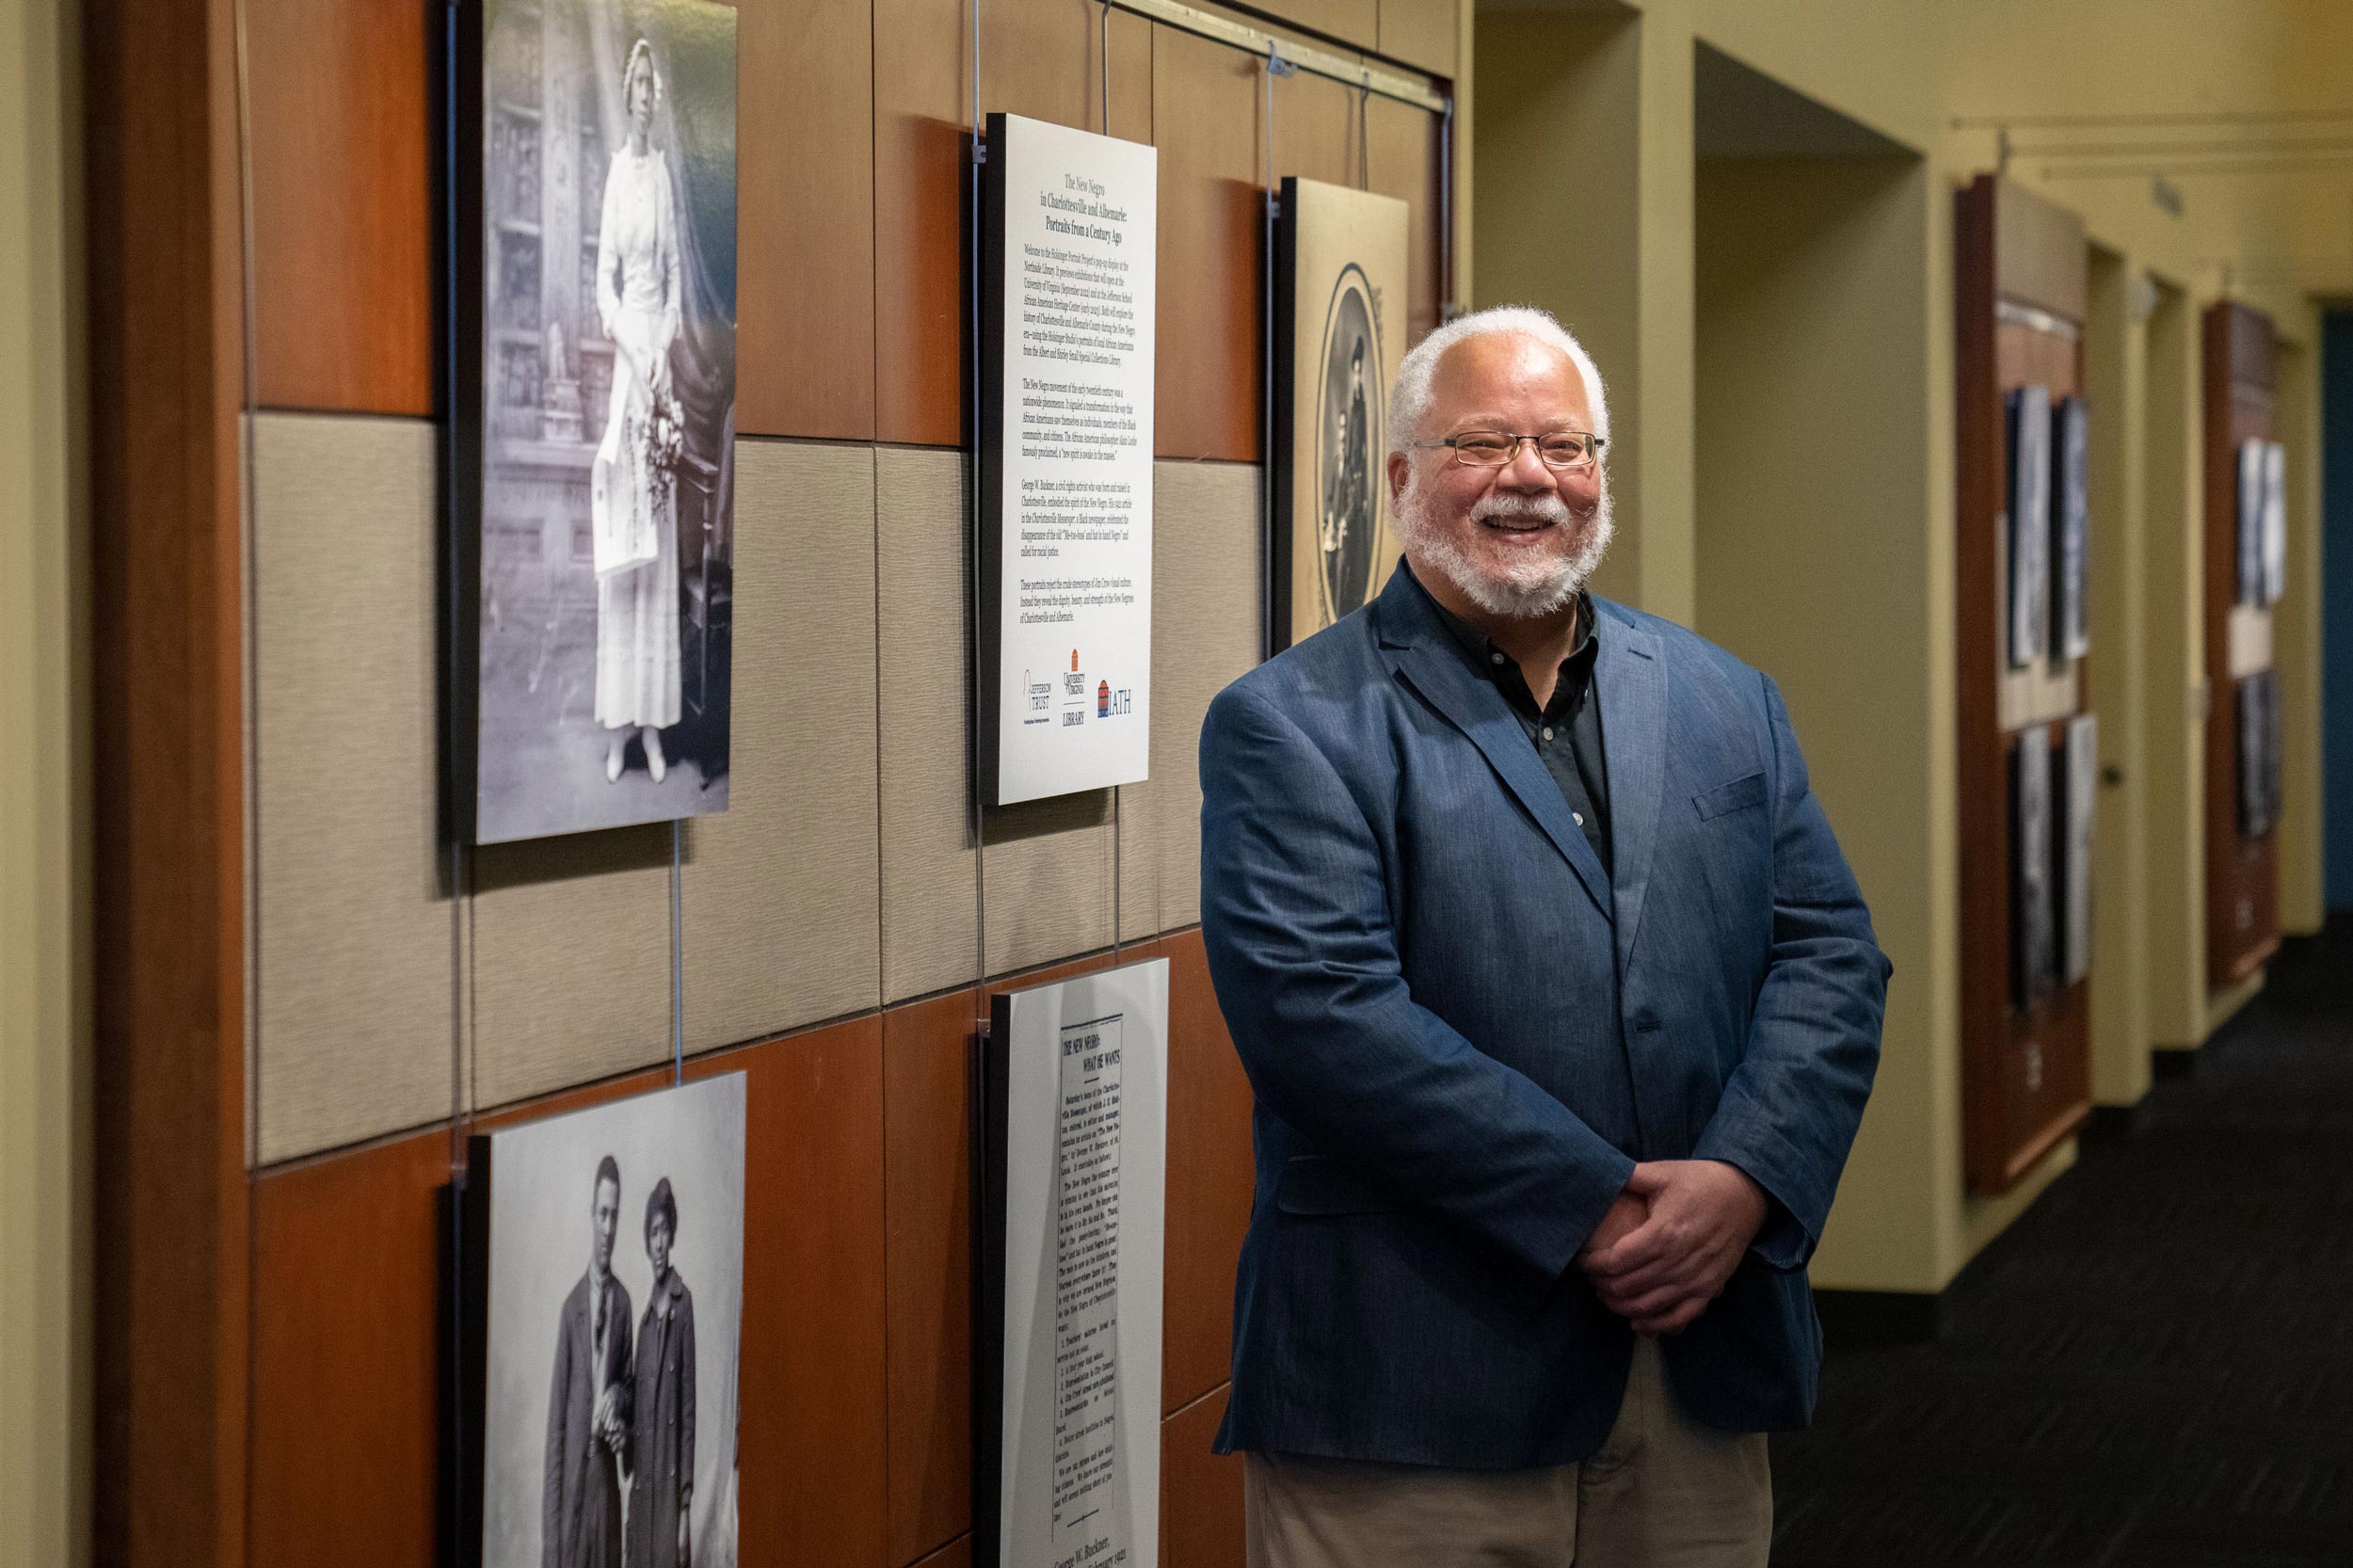 University of Virginia professor John Edwin Mason smiles in front of a section of the exhibit.